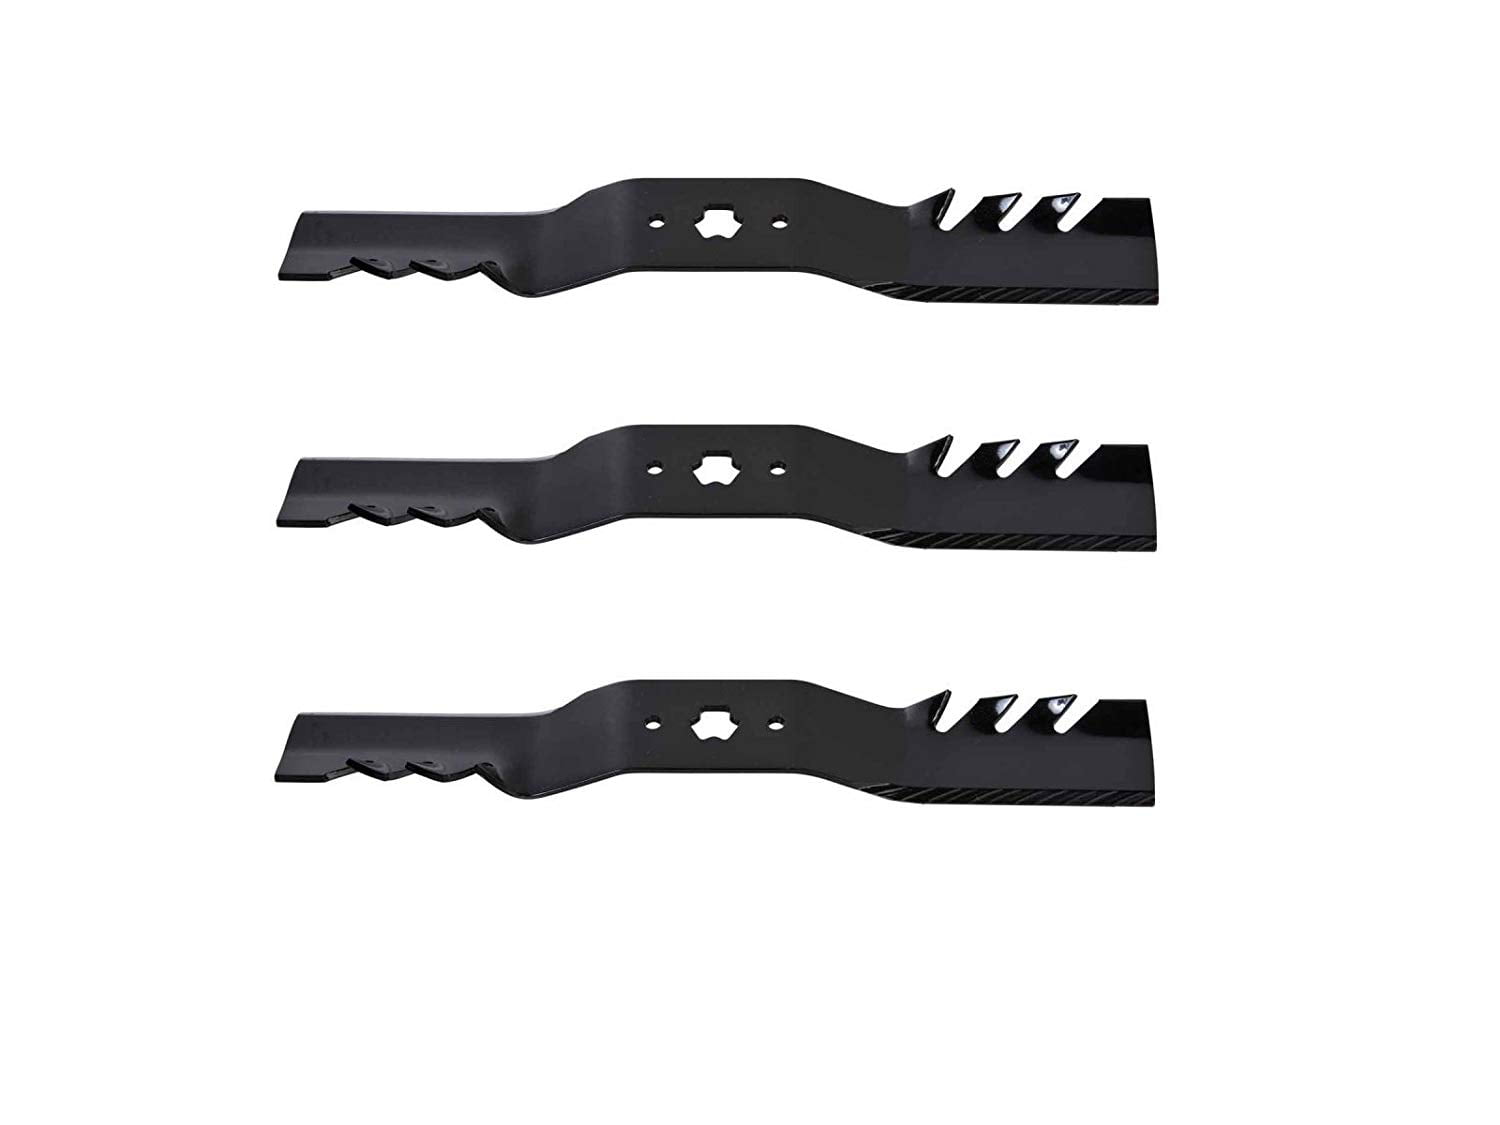 Cub Cadet Z54 Blades**MADE IN USA**759-3820 G47 742-3013 FOR Set of 3